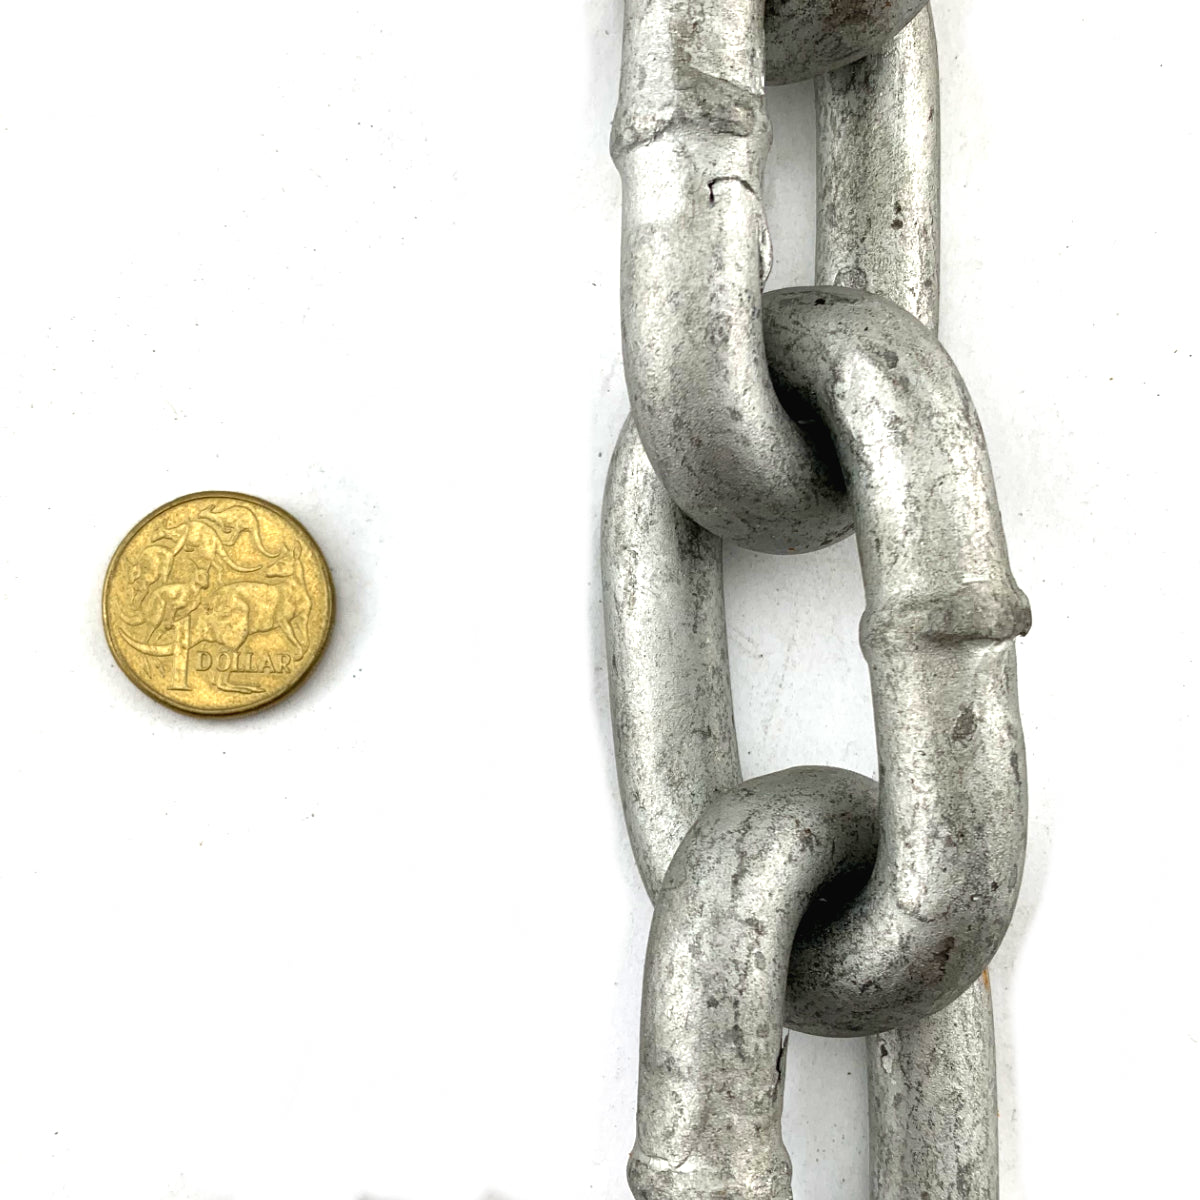 13mm welded link steel chain in a galvanised finish. Melbourne Australia